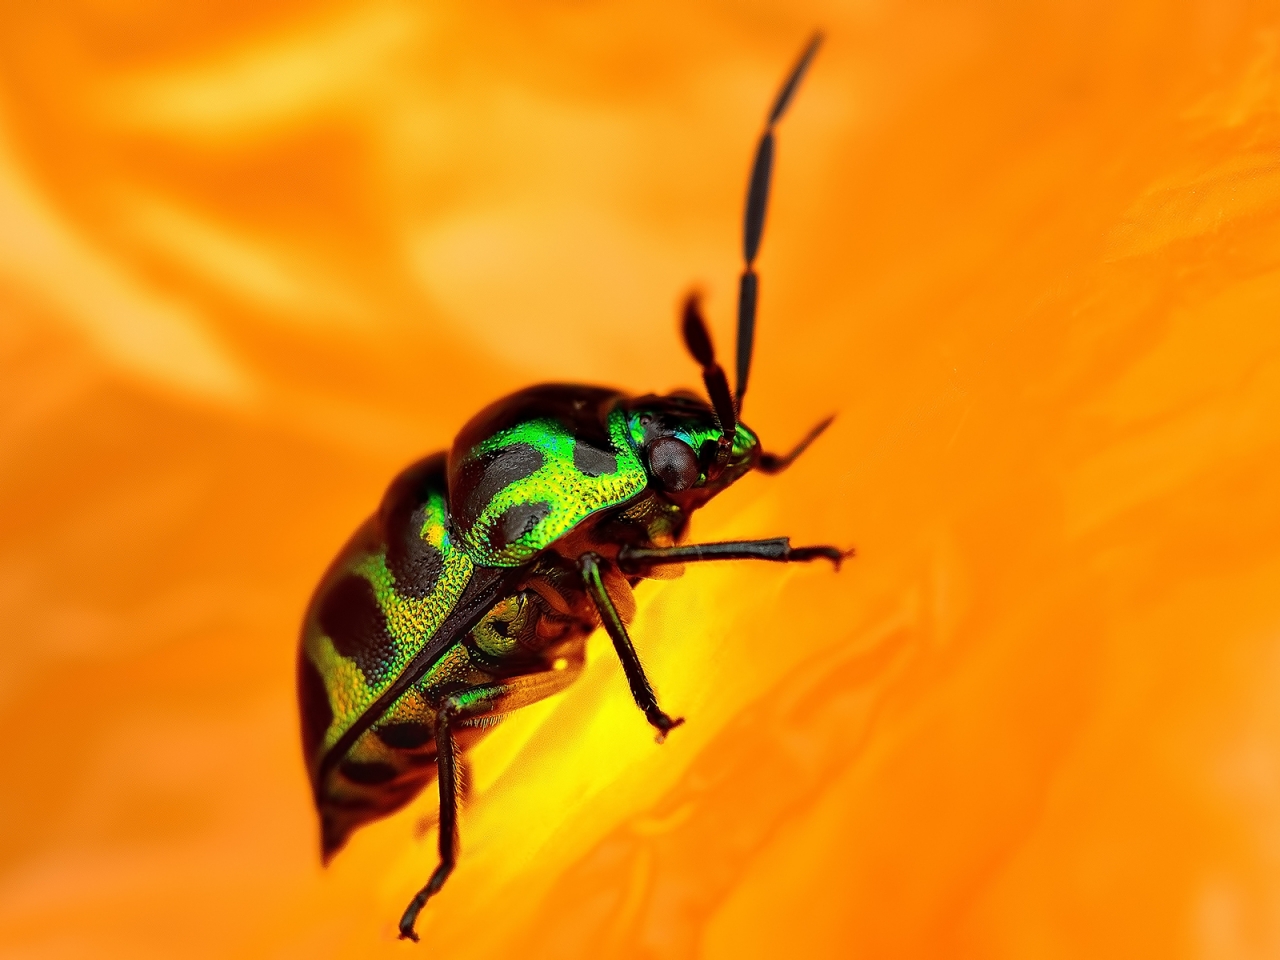 Green Beetle for 1280 x 960 resolution